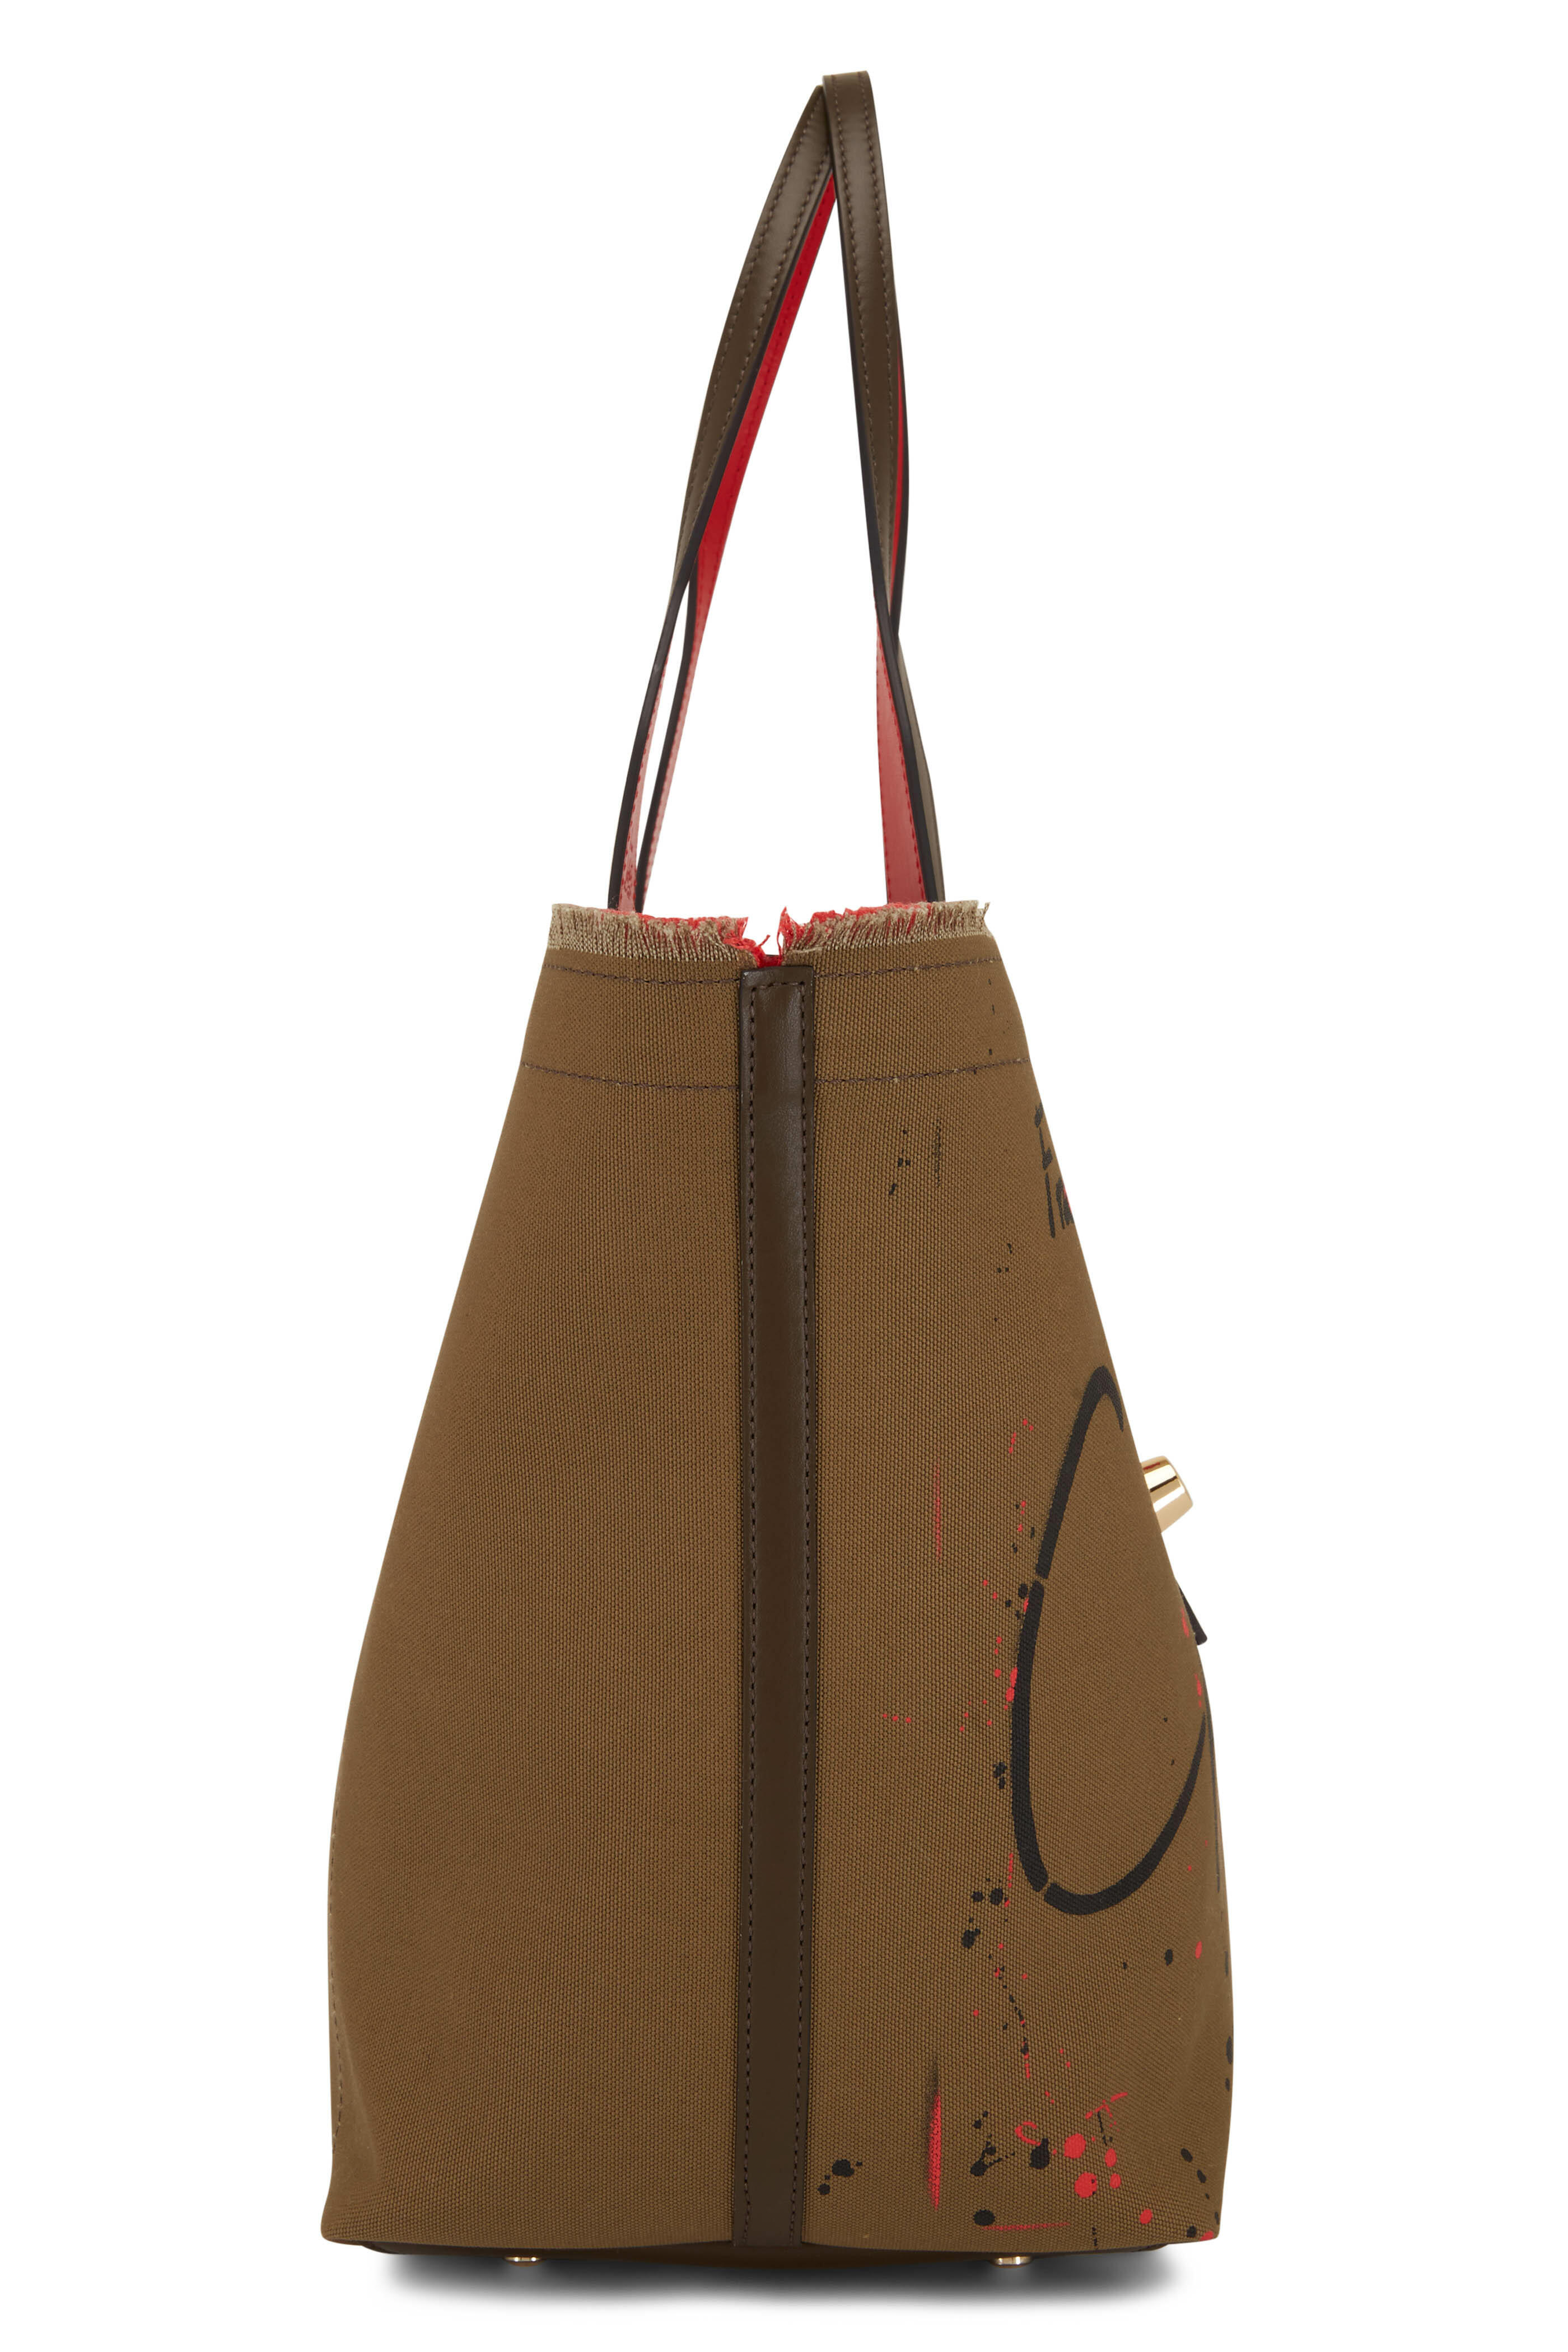 CHRISTIAN LOUBOUTIN Logo-Embossed Canvas and Leather Tote Bag for